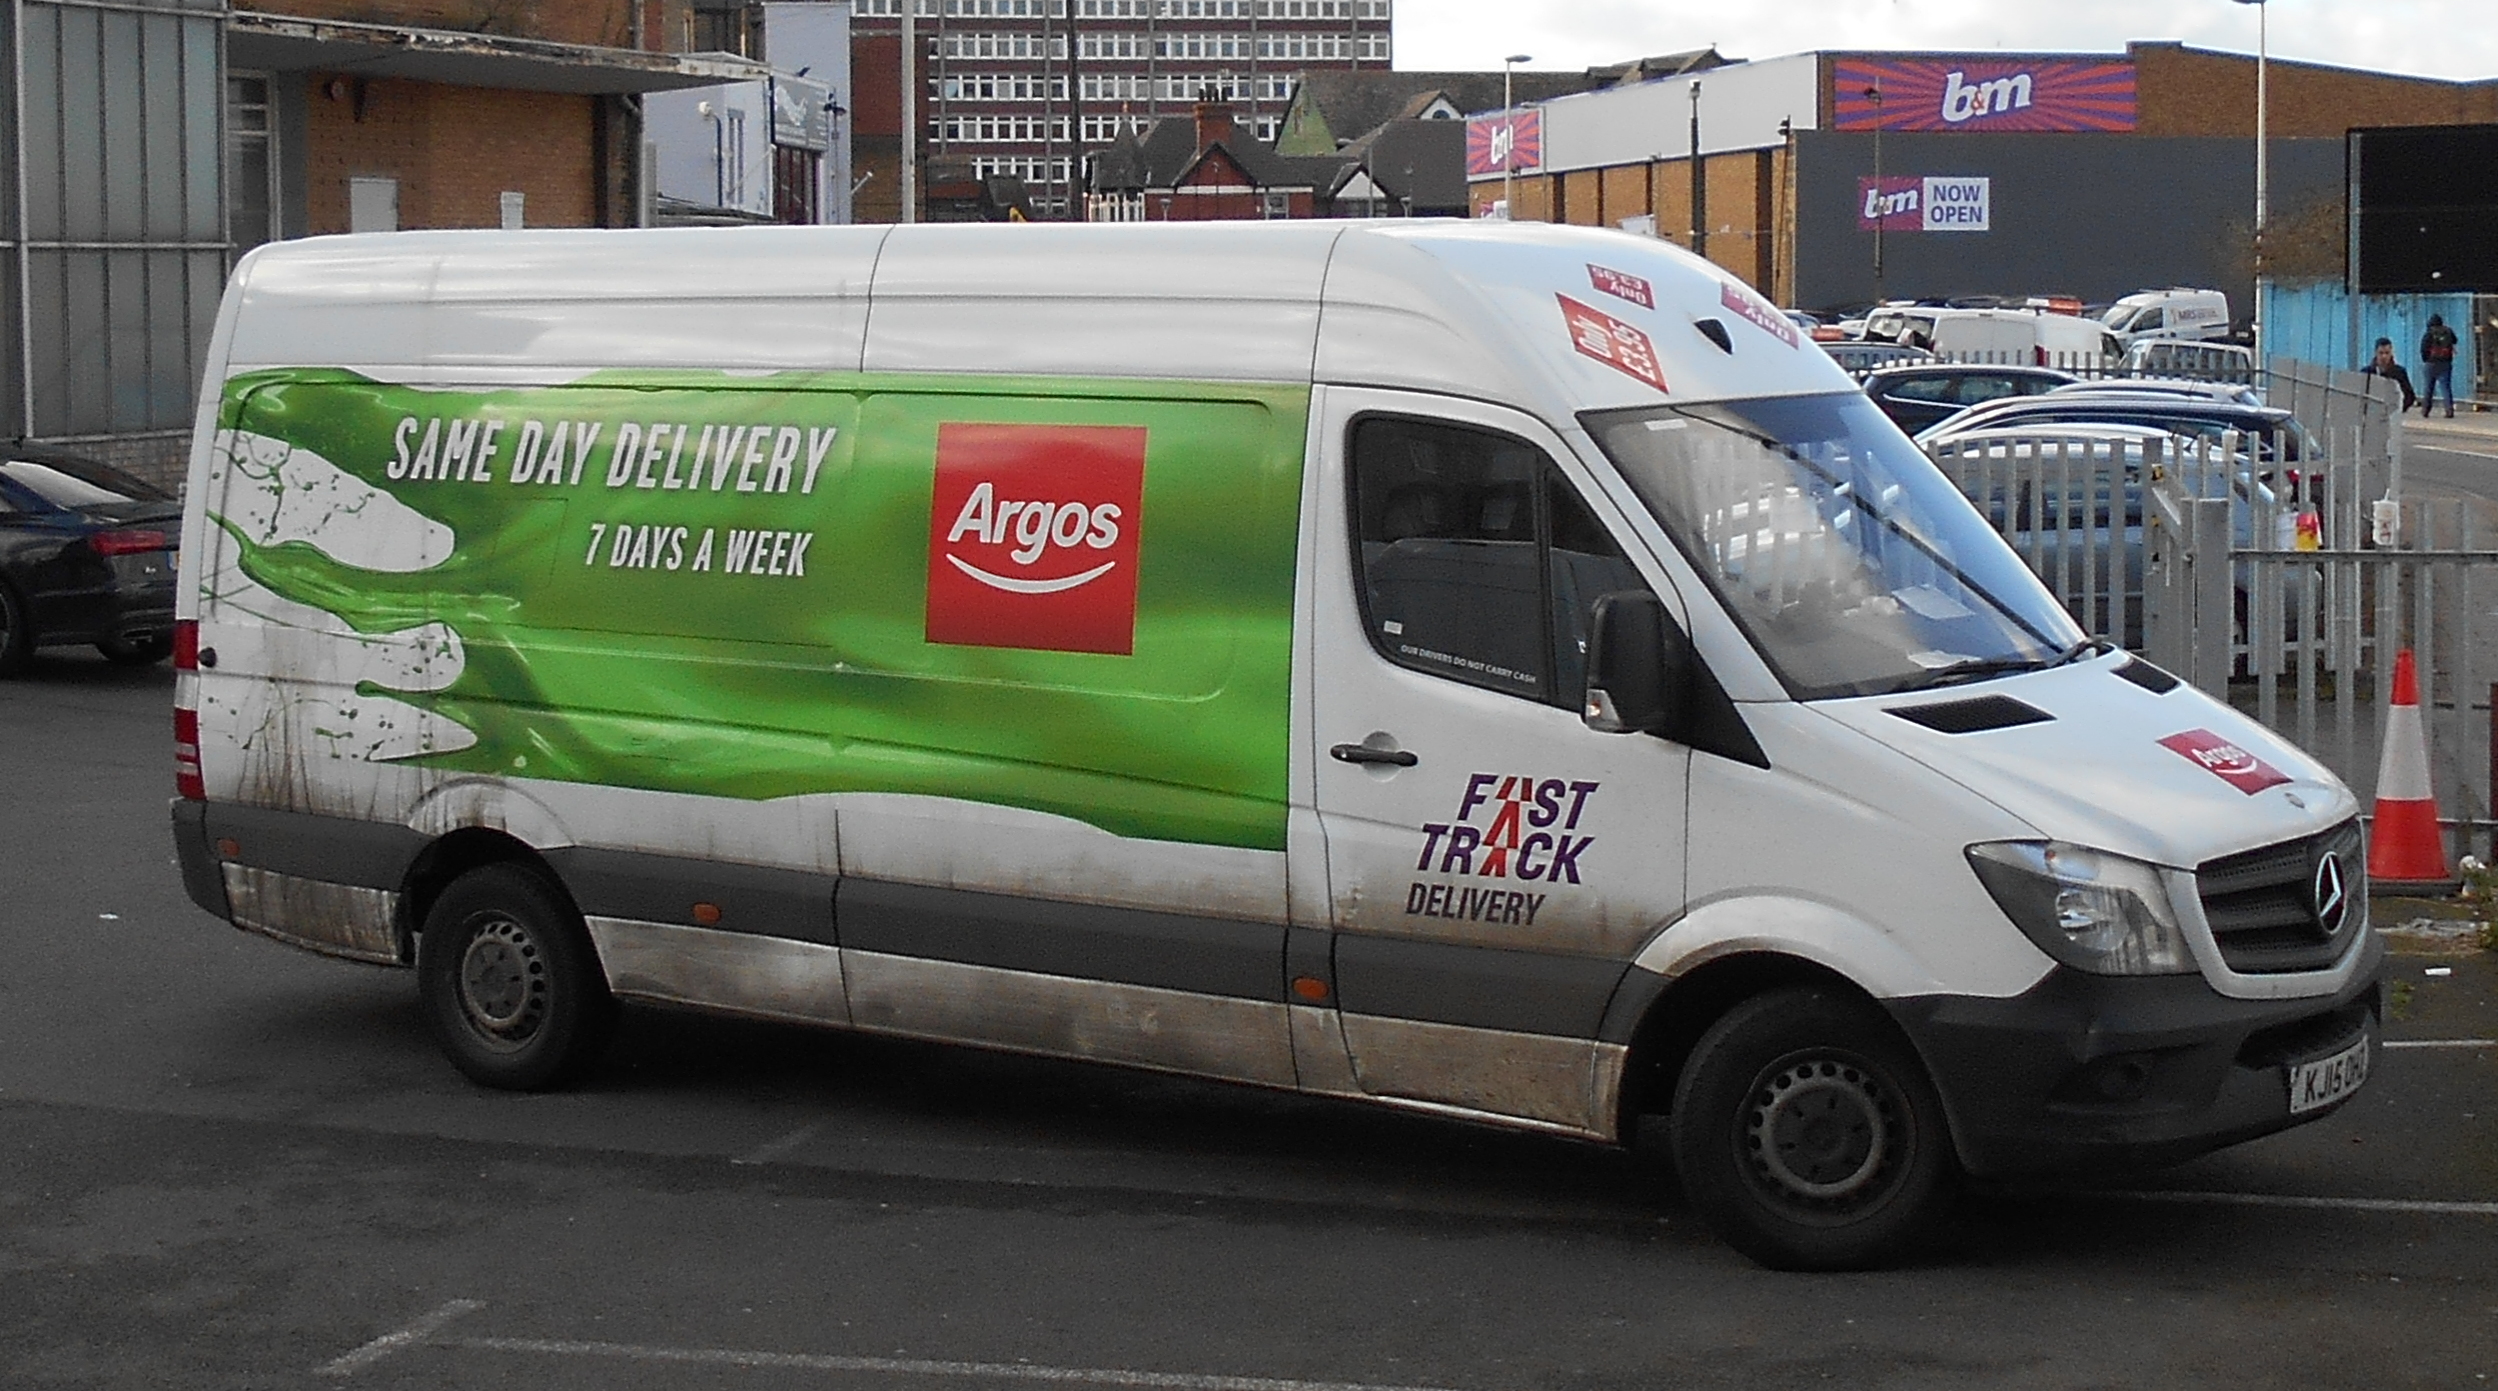 File:Argos delivery van, Chatham, Kent, 16 January 2018 (cropped).jpg -  Wikimedia Commons